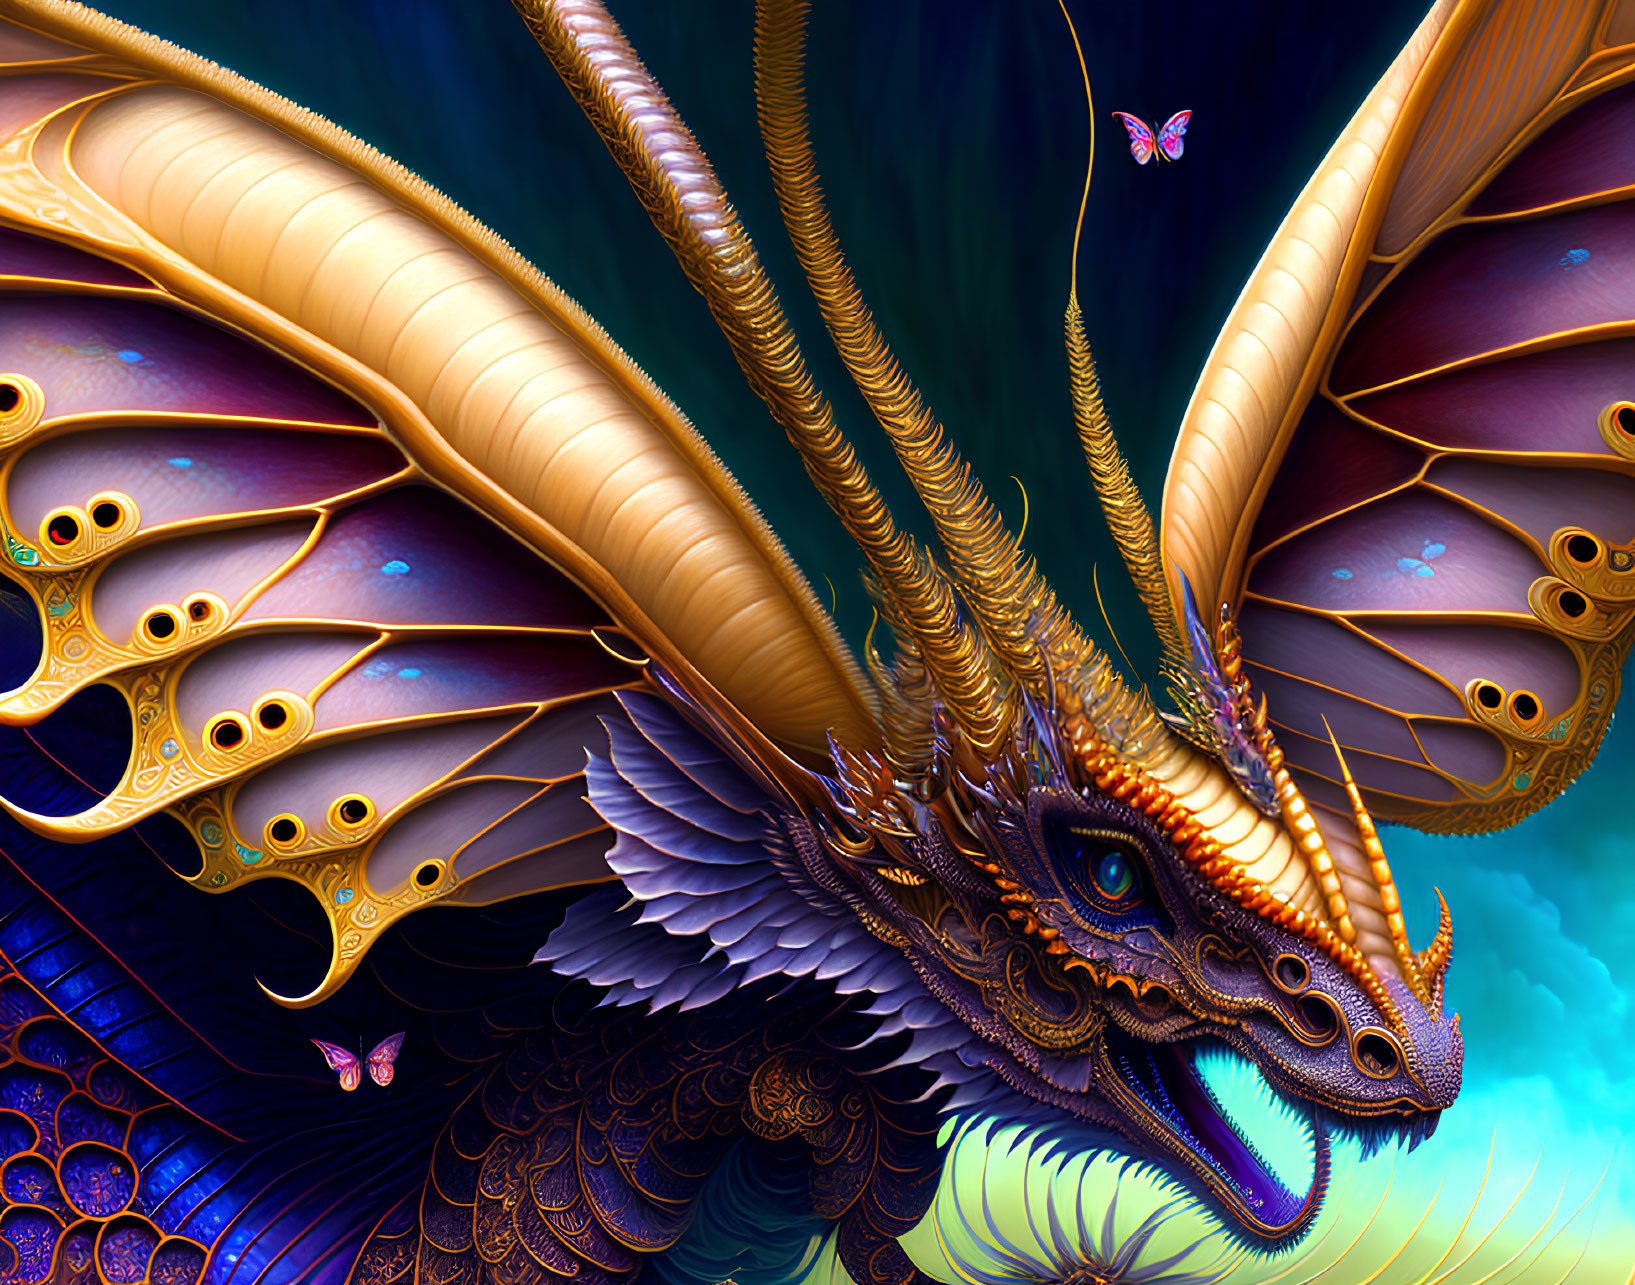 Detailed Golden Dragon Artwork with Wings and Horns on Dark Blue Background